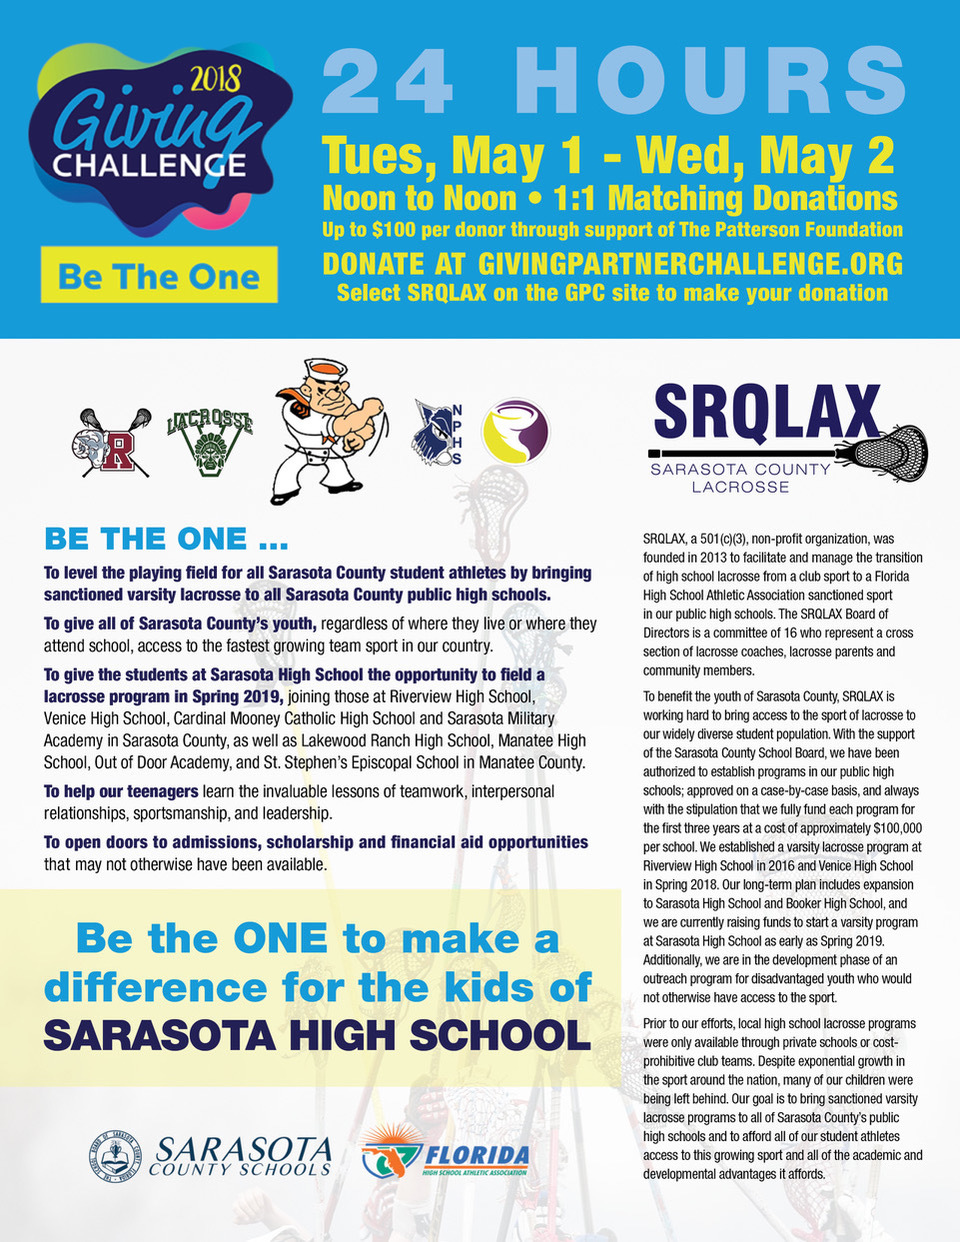 Sarasota High is trying to become the next Sarasota County school to start boys and girls lacrosse programs, and its fundraising effort begins with the 2018 Giving Challenge.